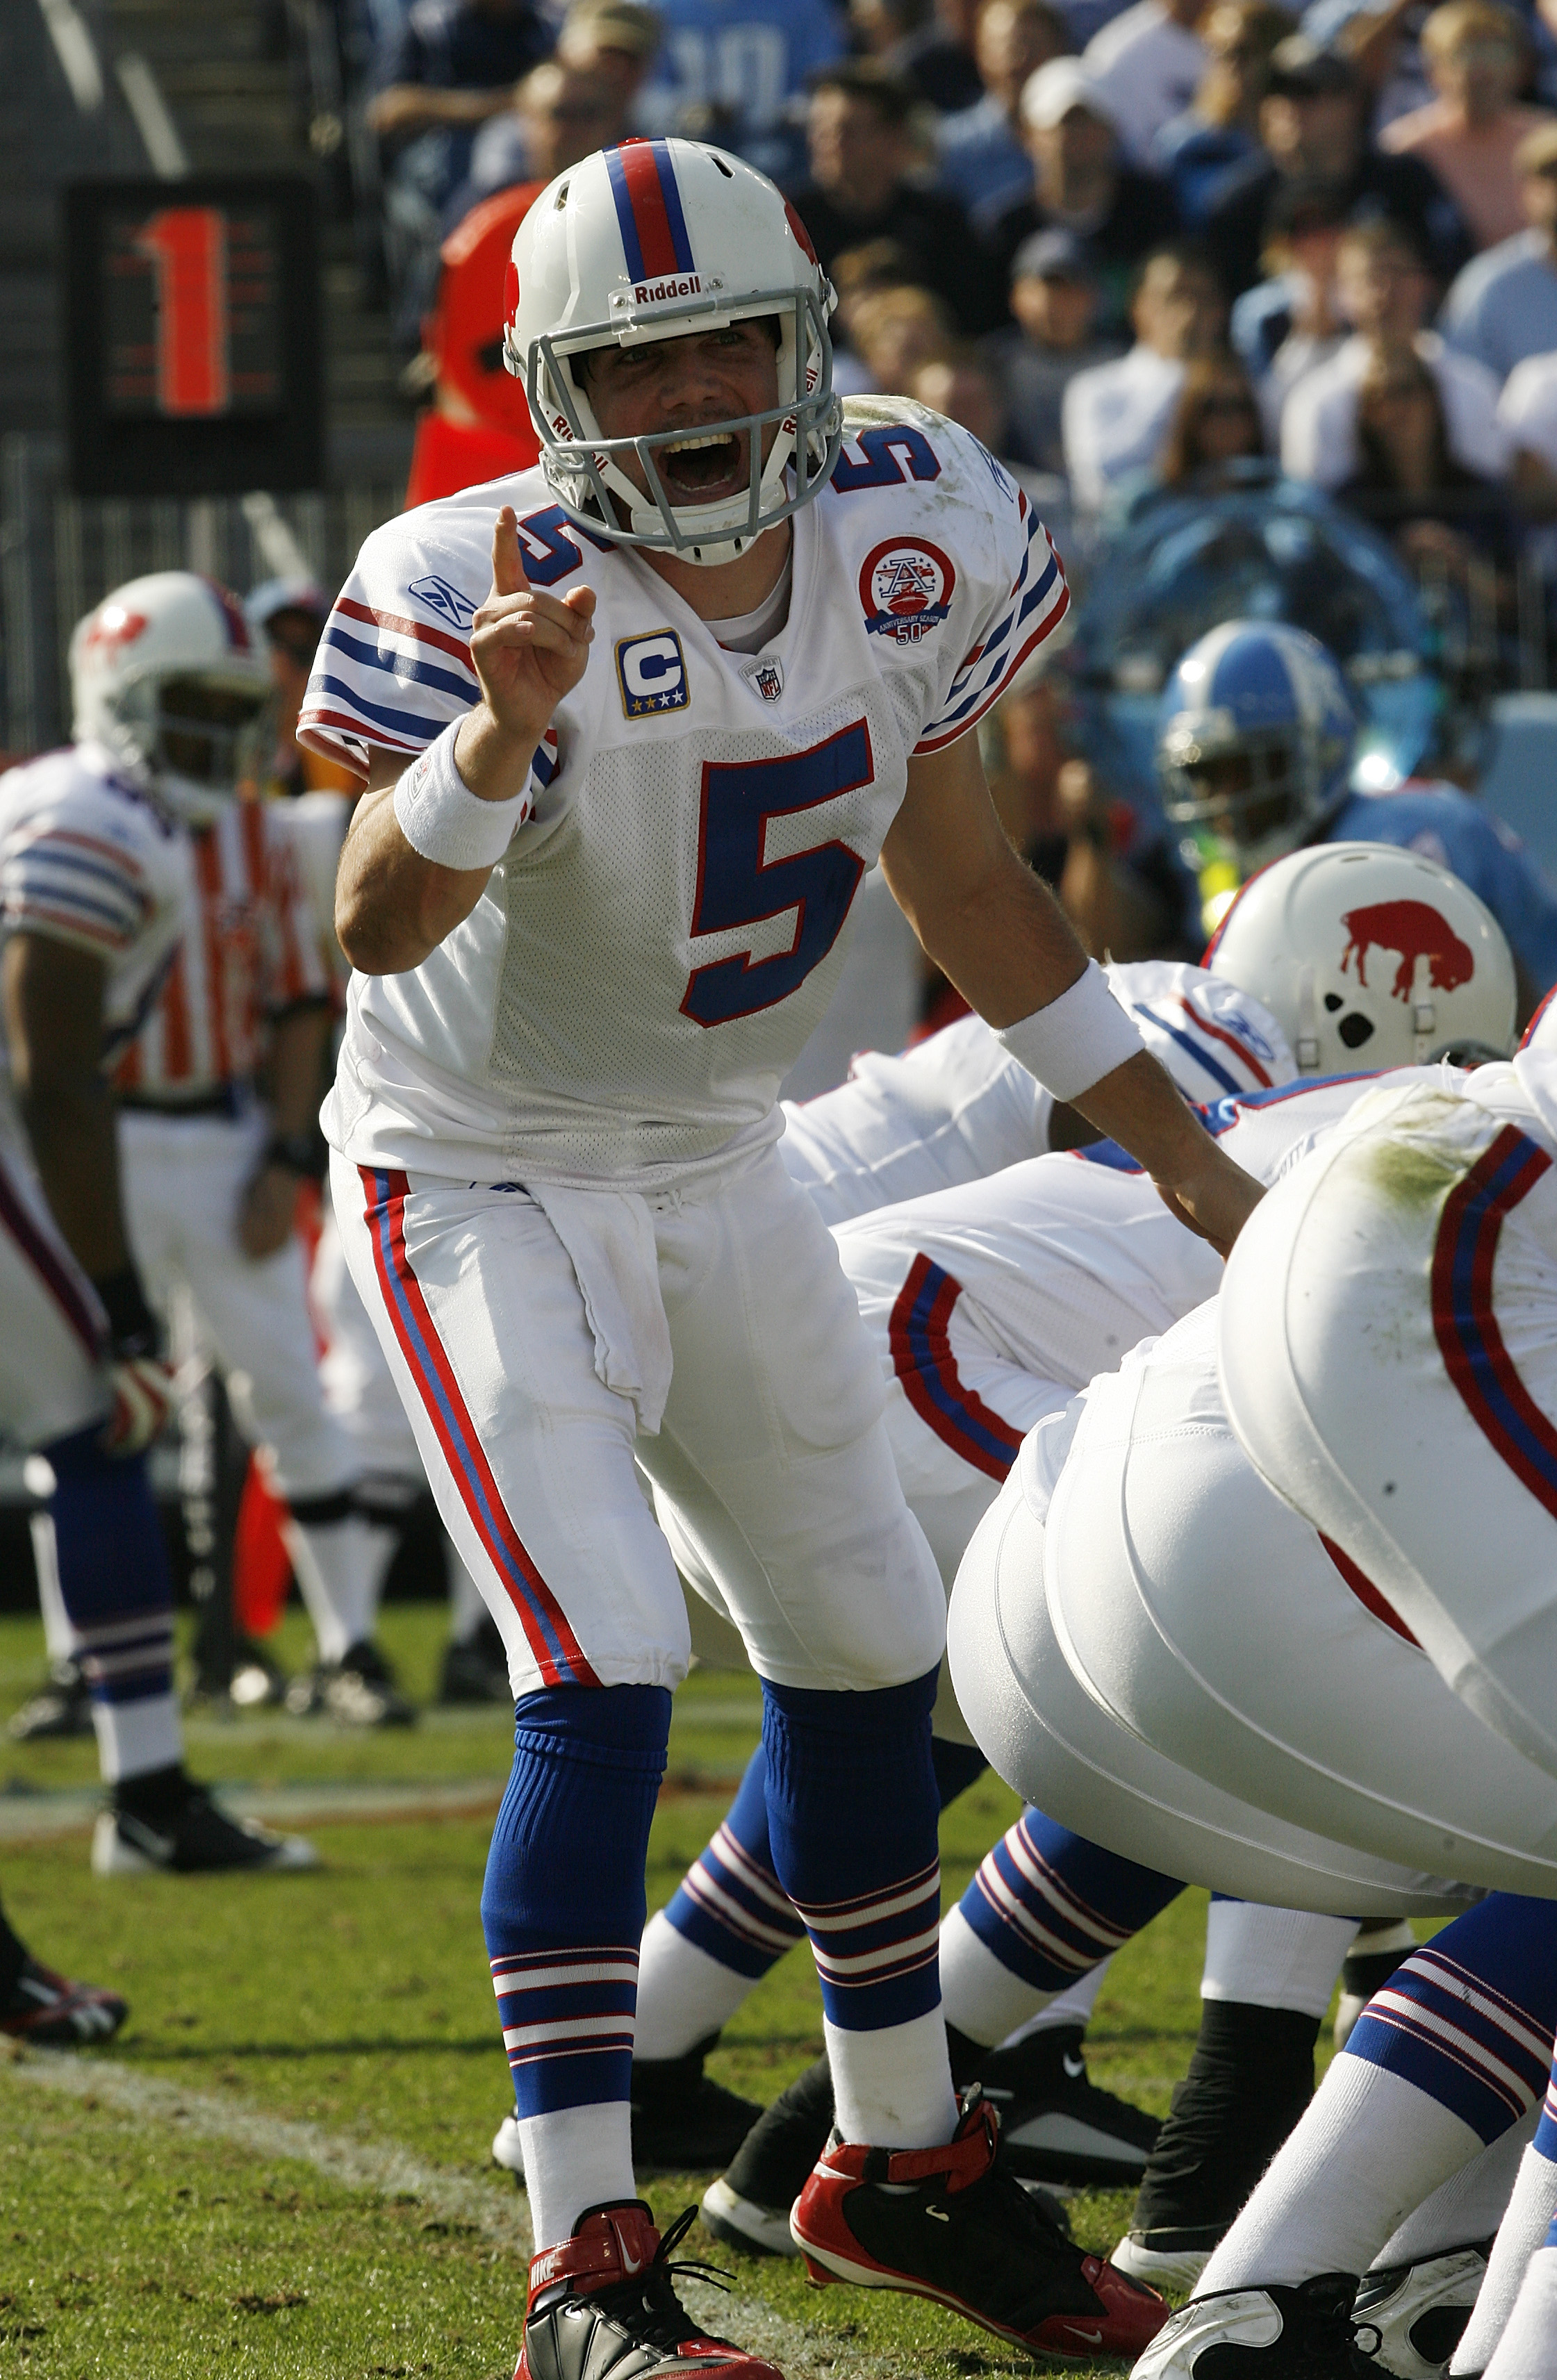 How to watch the Buffalo Bills preseason game against the